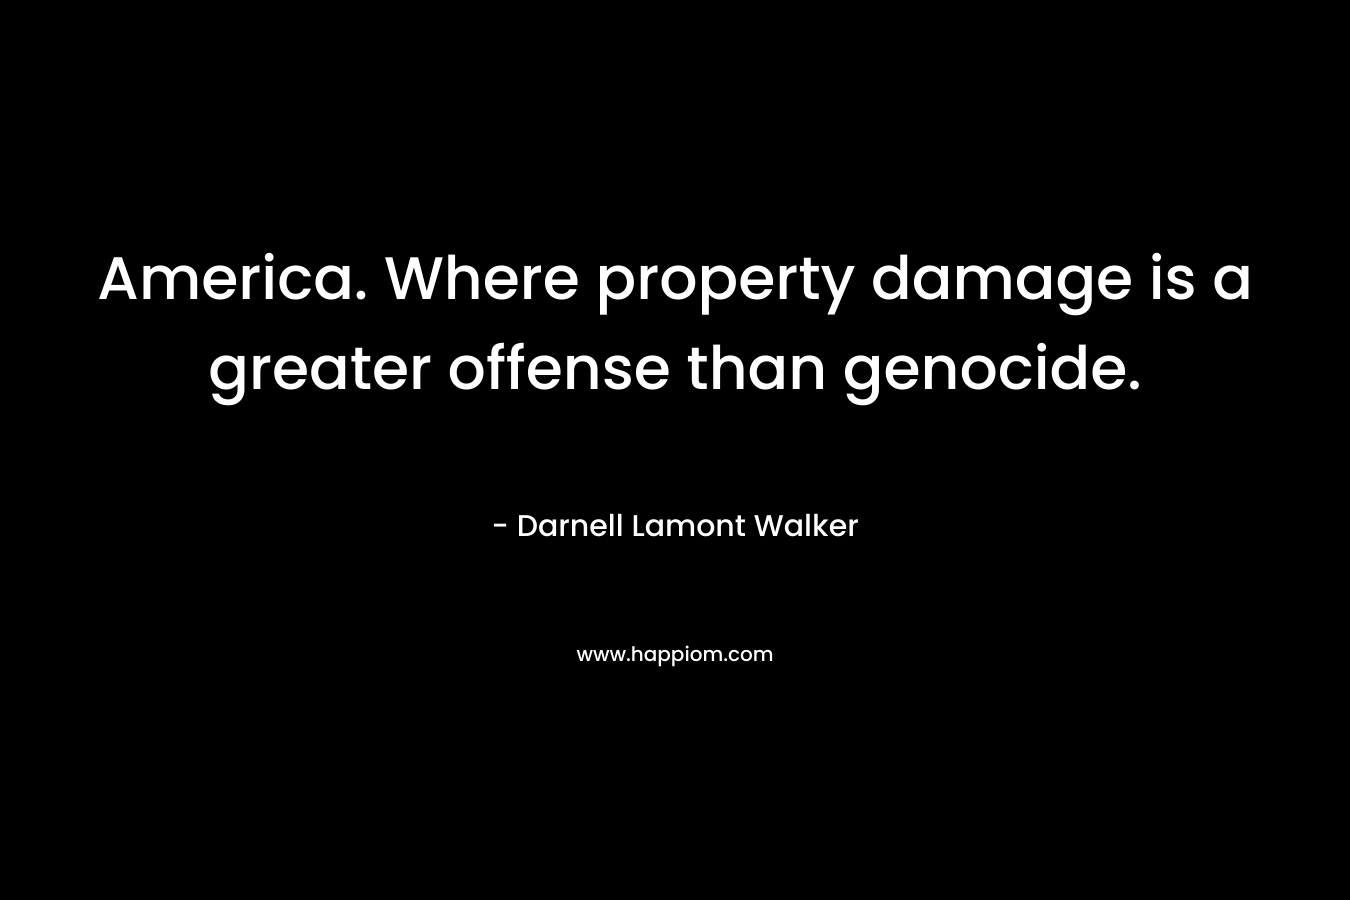 America. Where property damage is a greater offense than genocide. – Darnell Lamont Walker